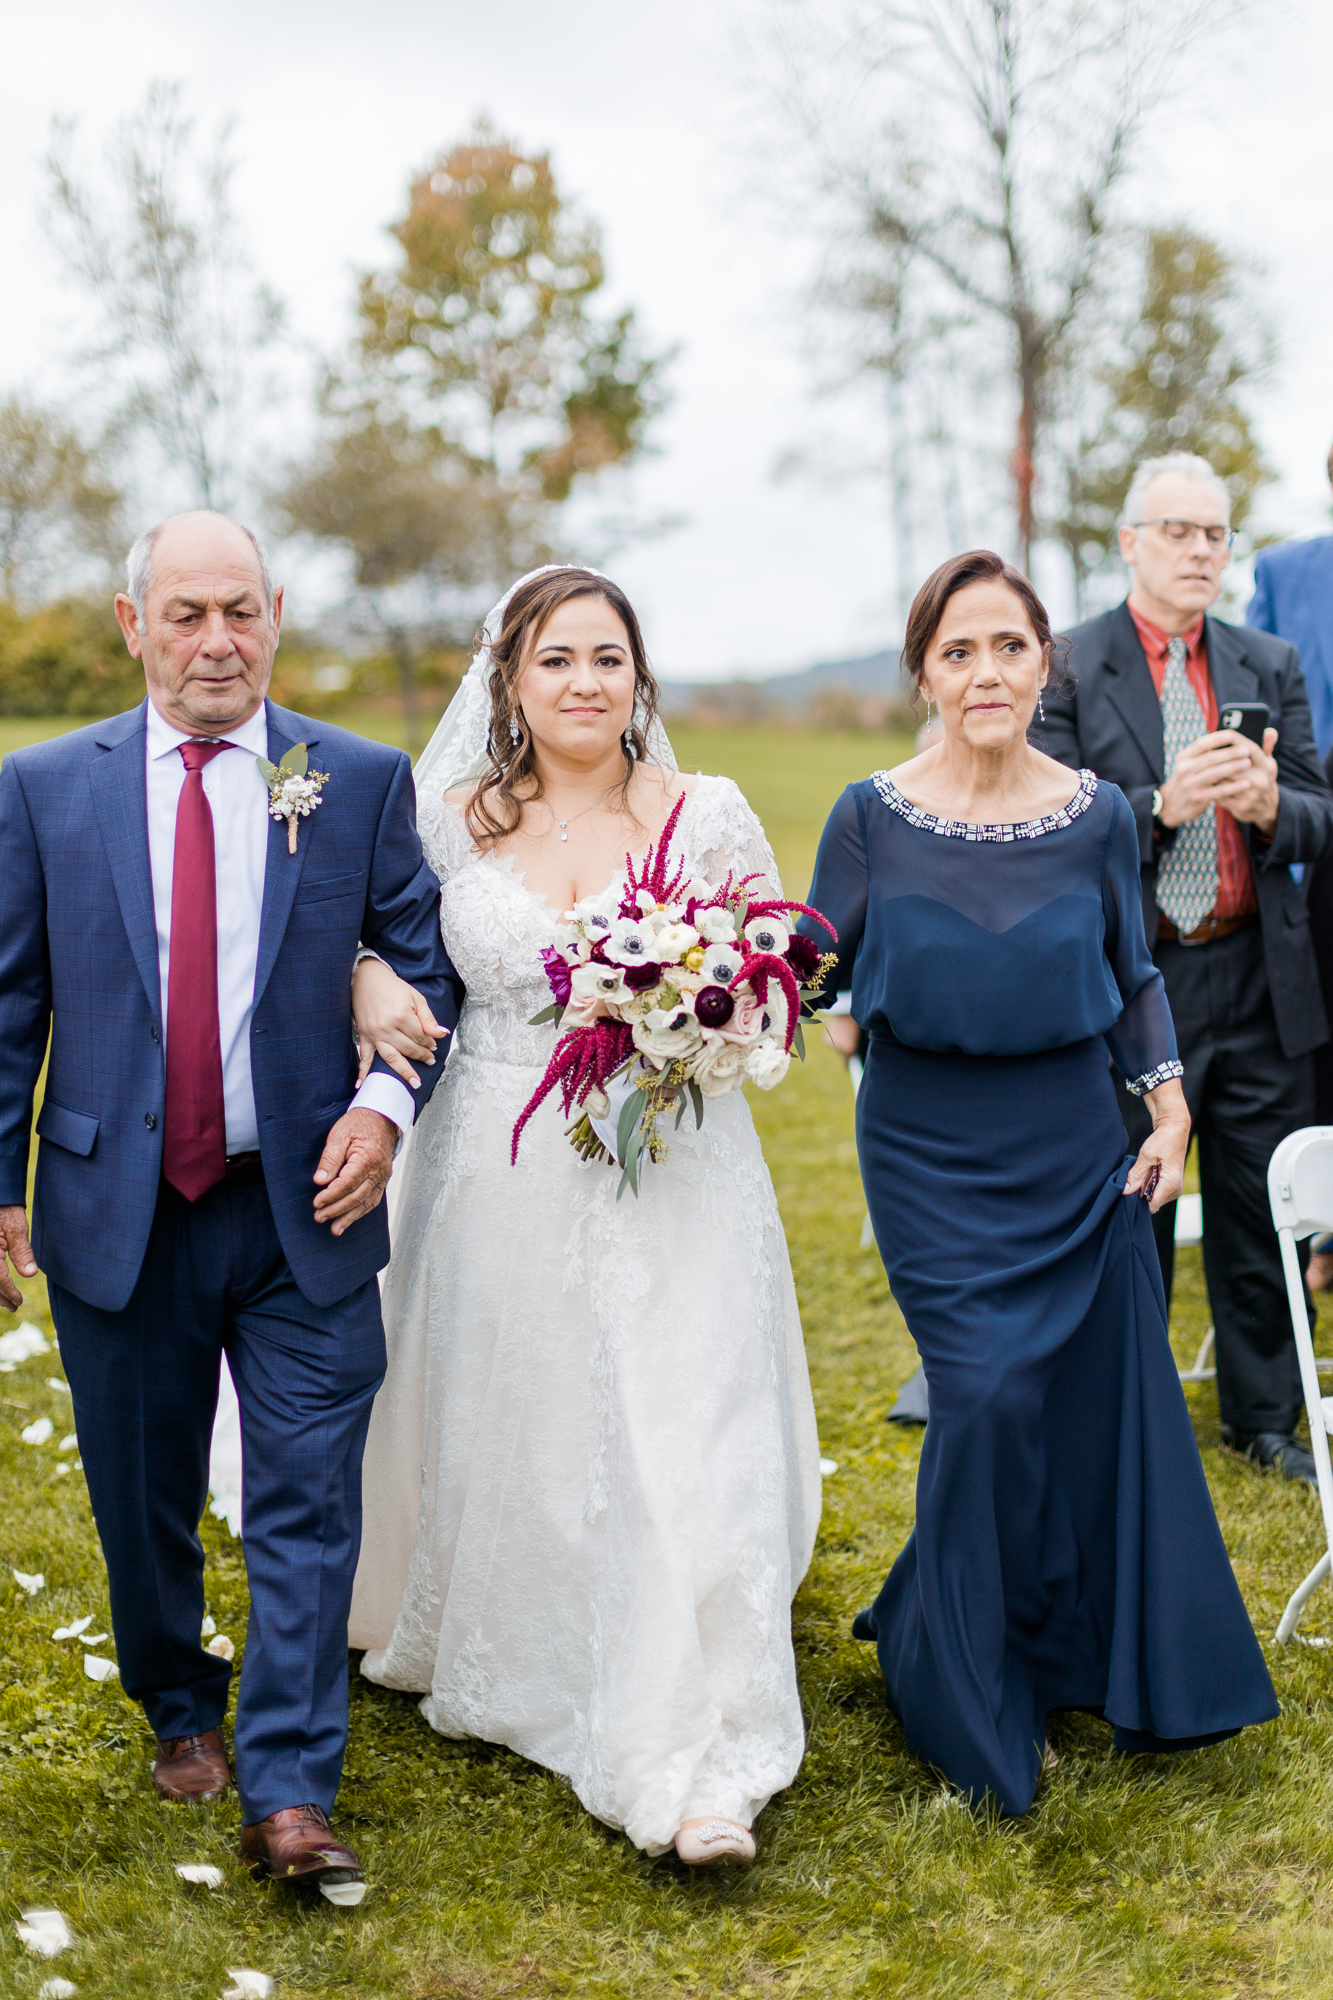  New Jersey Wedding Photos at the Farm at Glenwood Mountain in Autumn